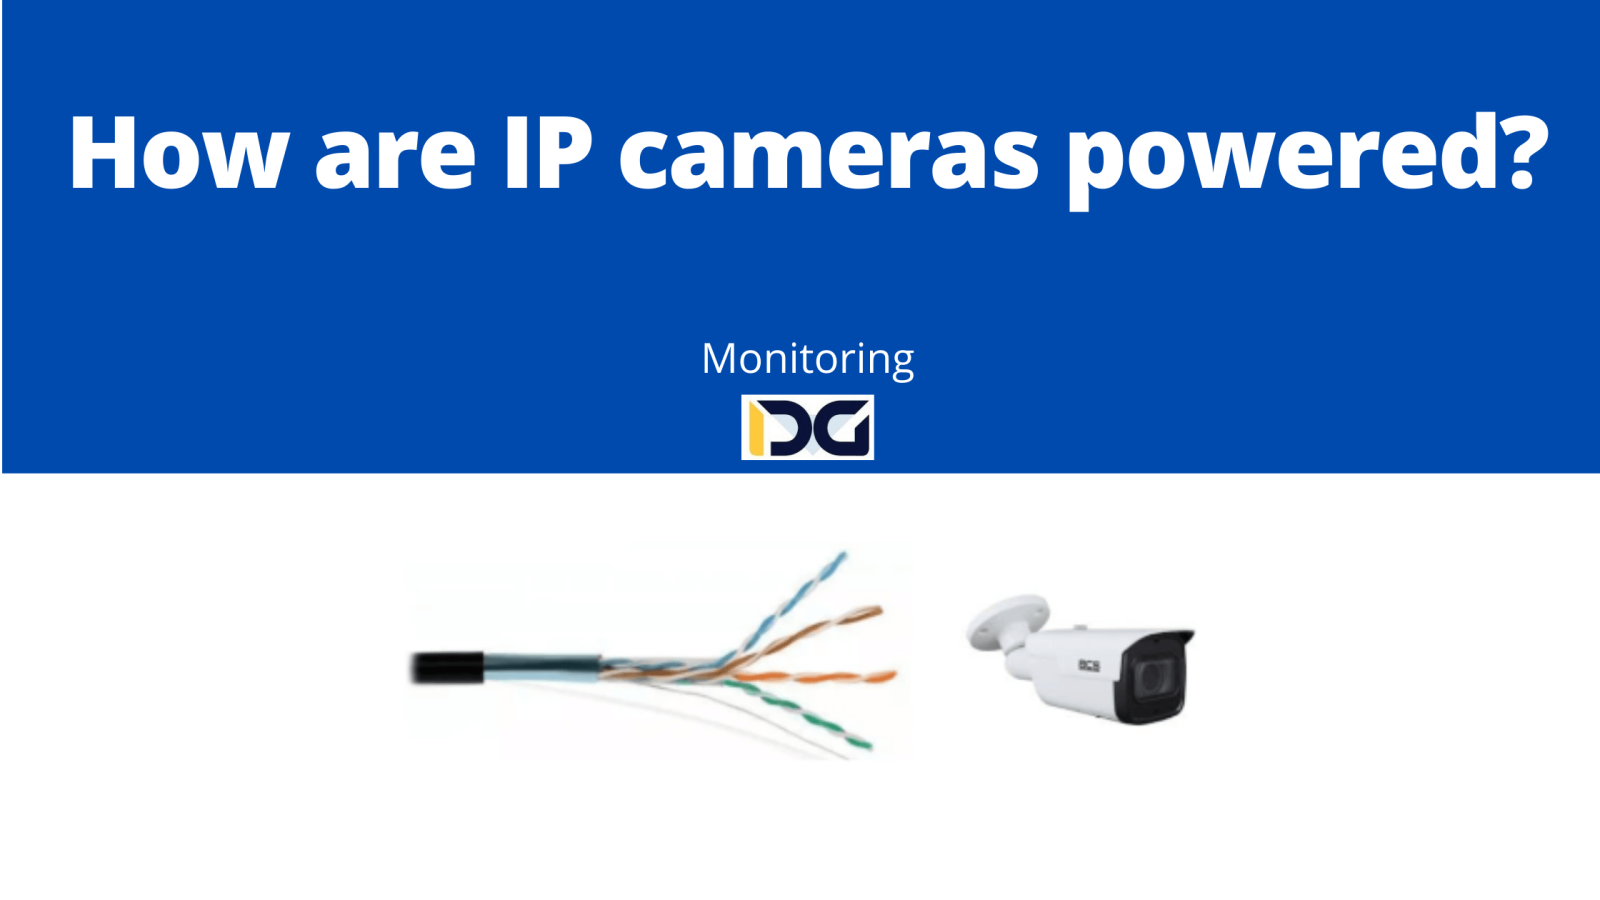 How are IP cameras powered?